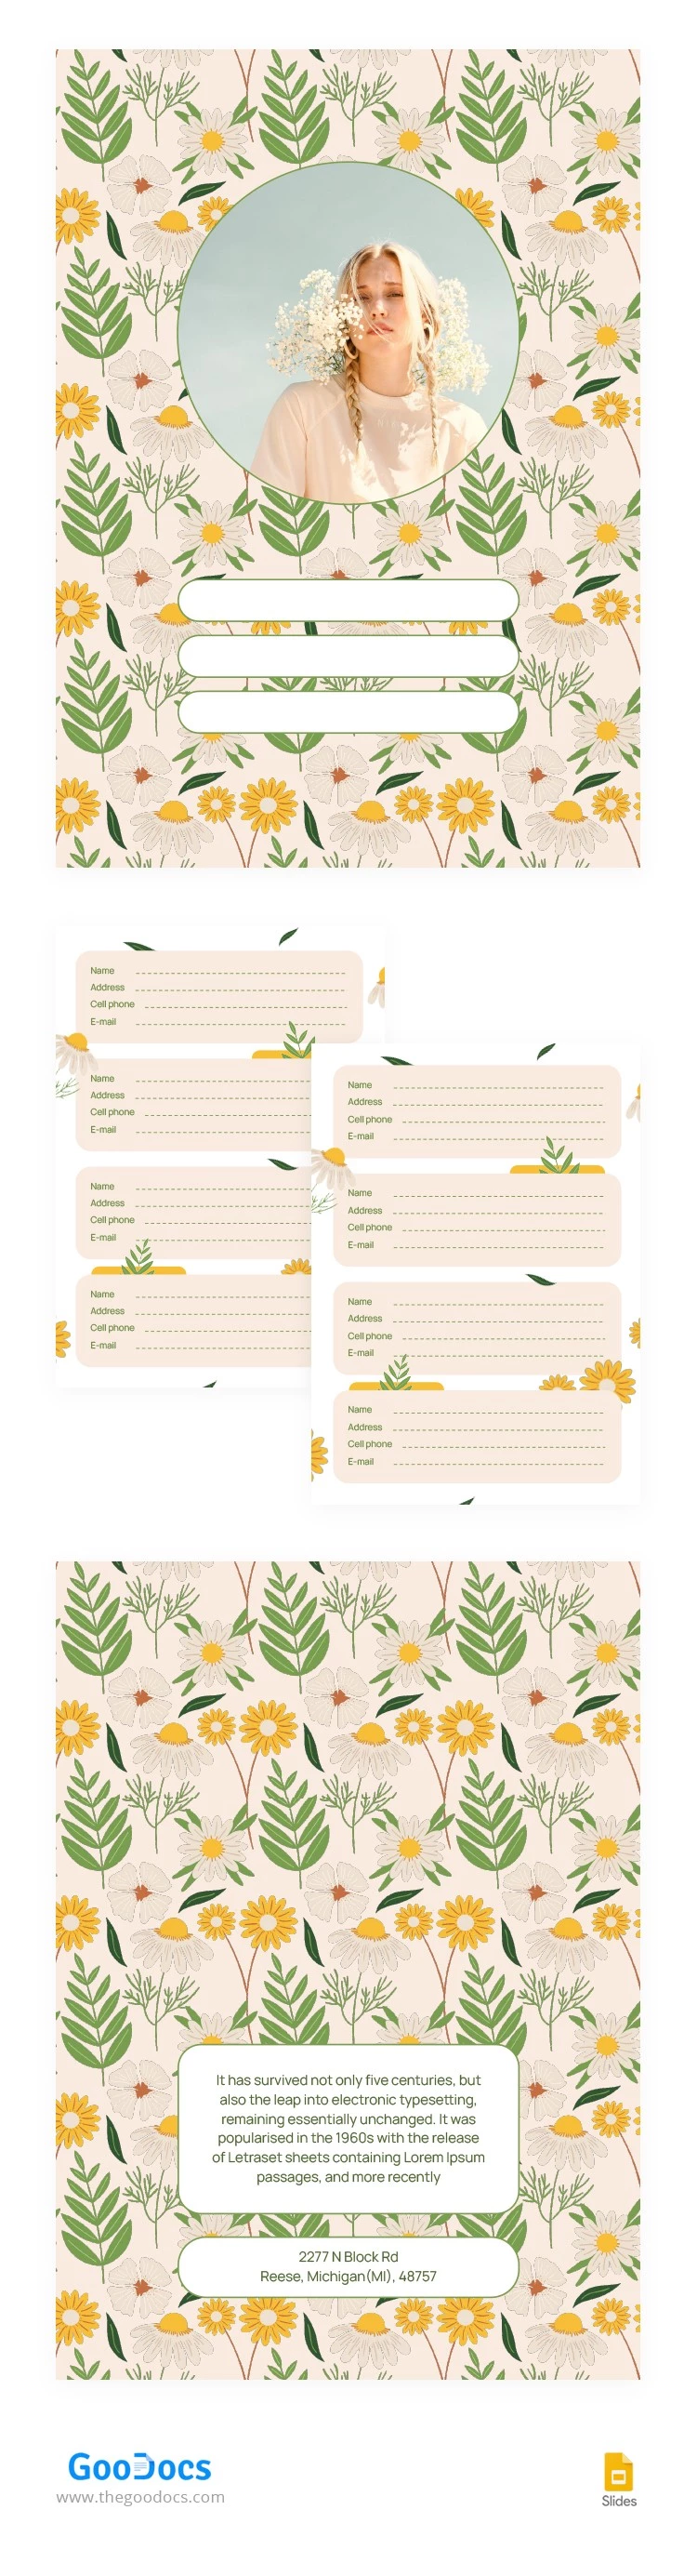 Address Book with Flowers - free Google Docs Template - 10066175